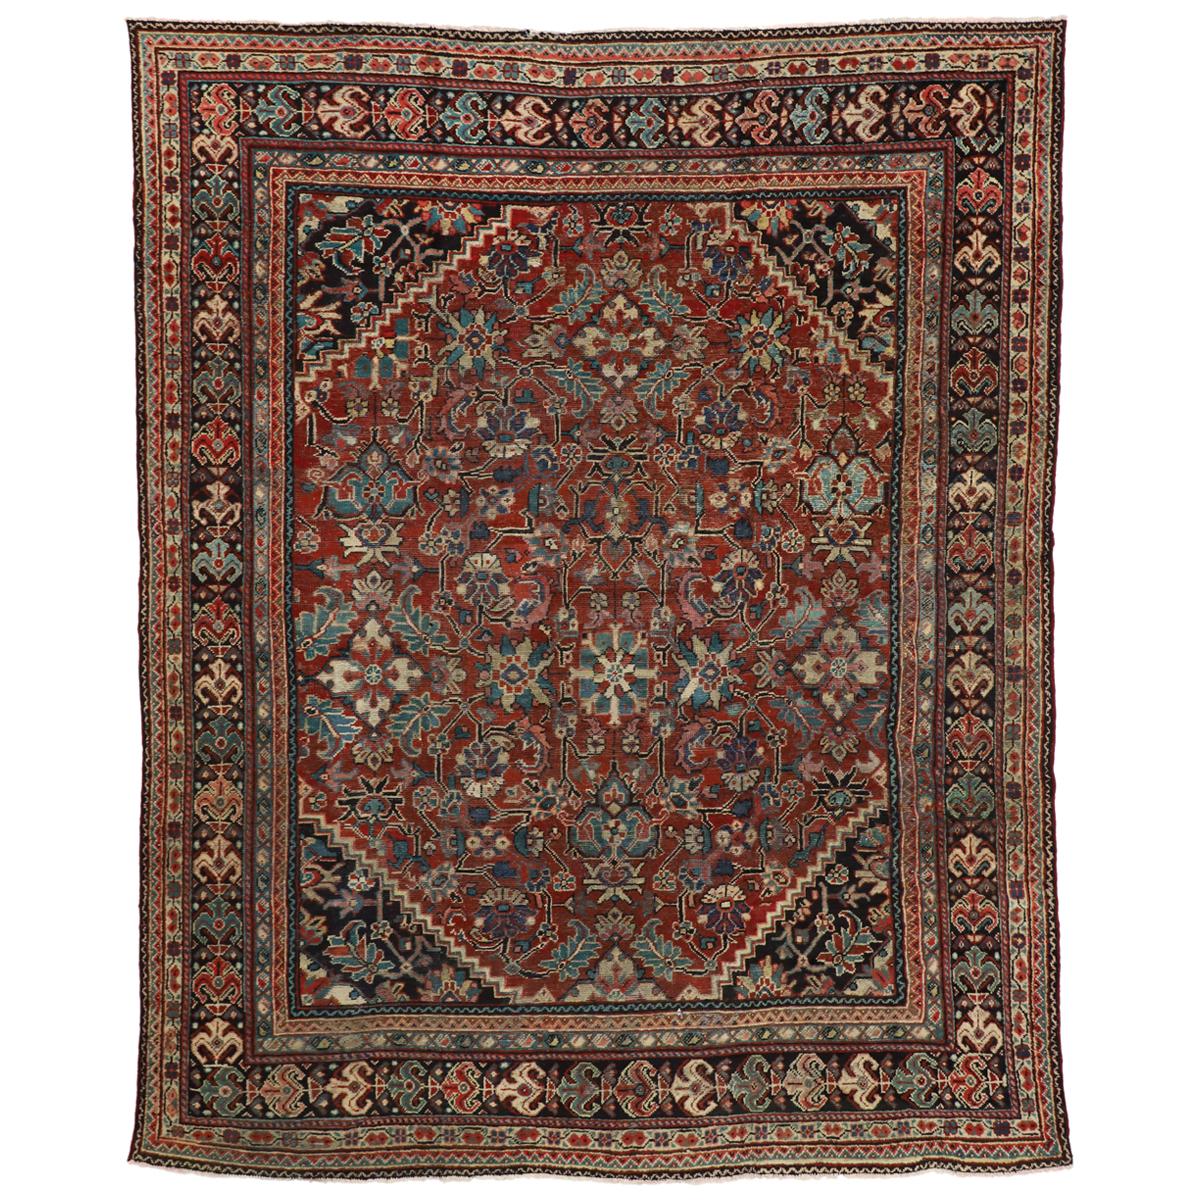 Vintage Persian Mahal Rug with Traditional American Colonial Style